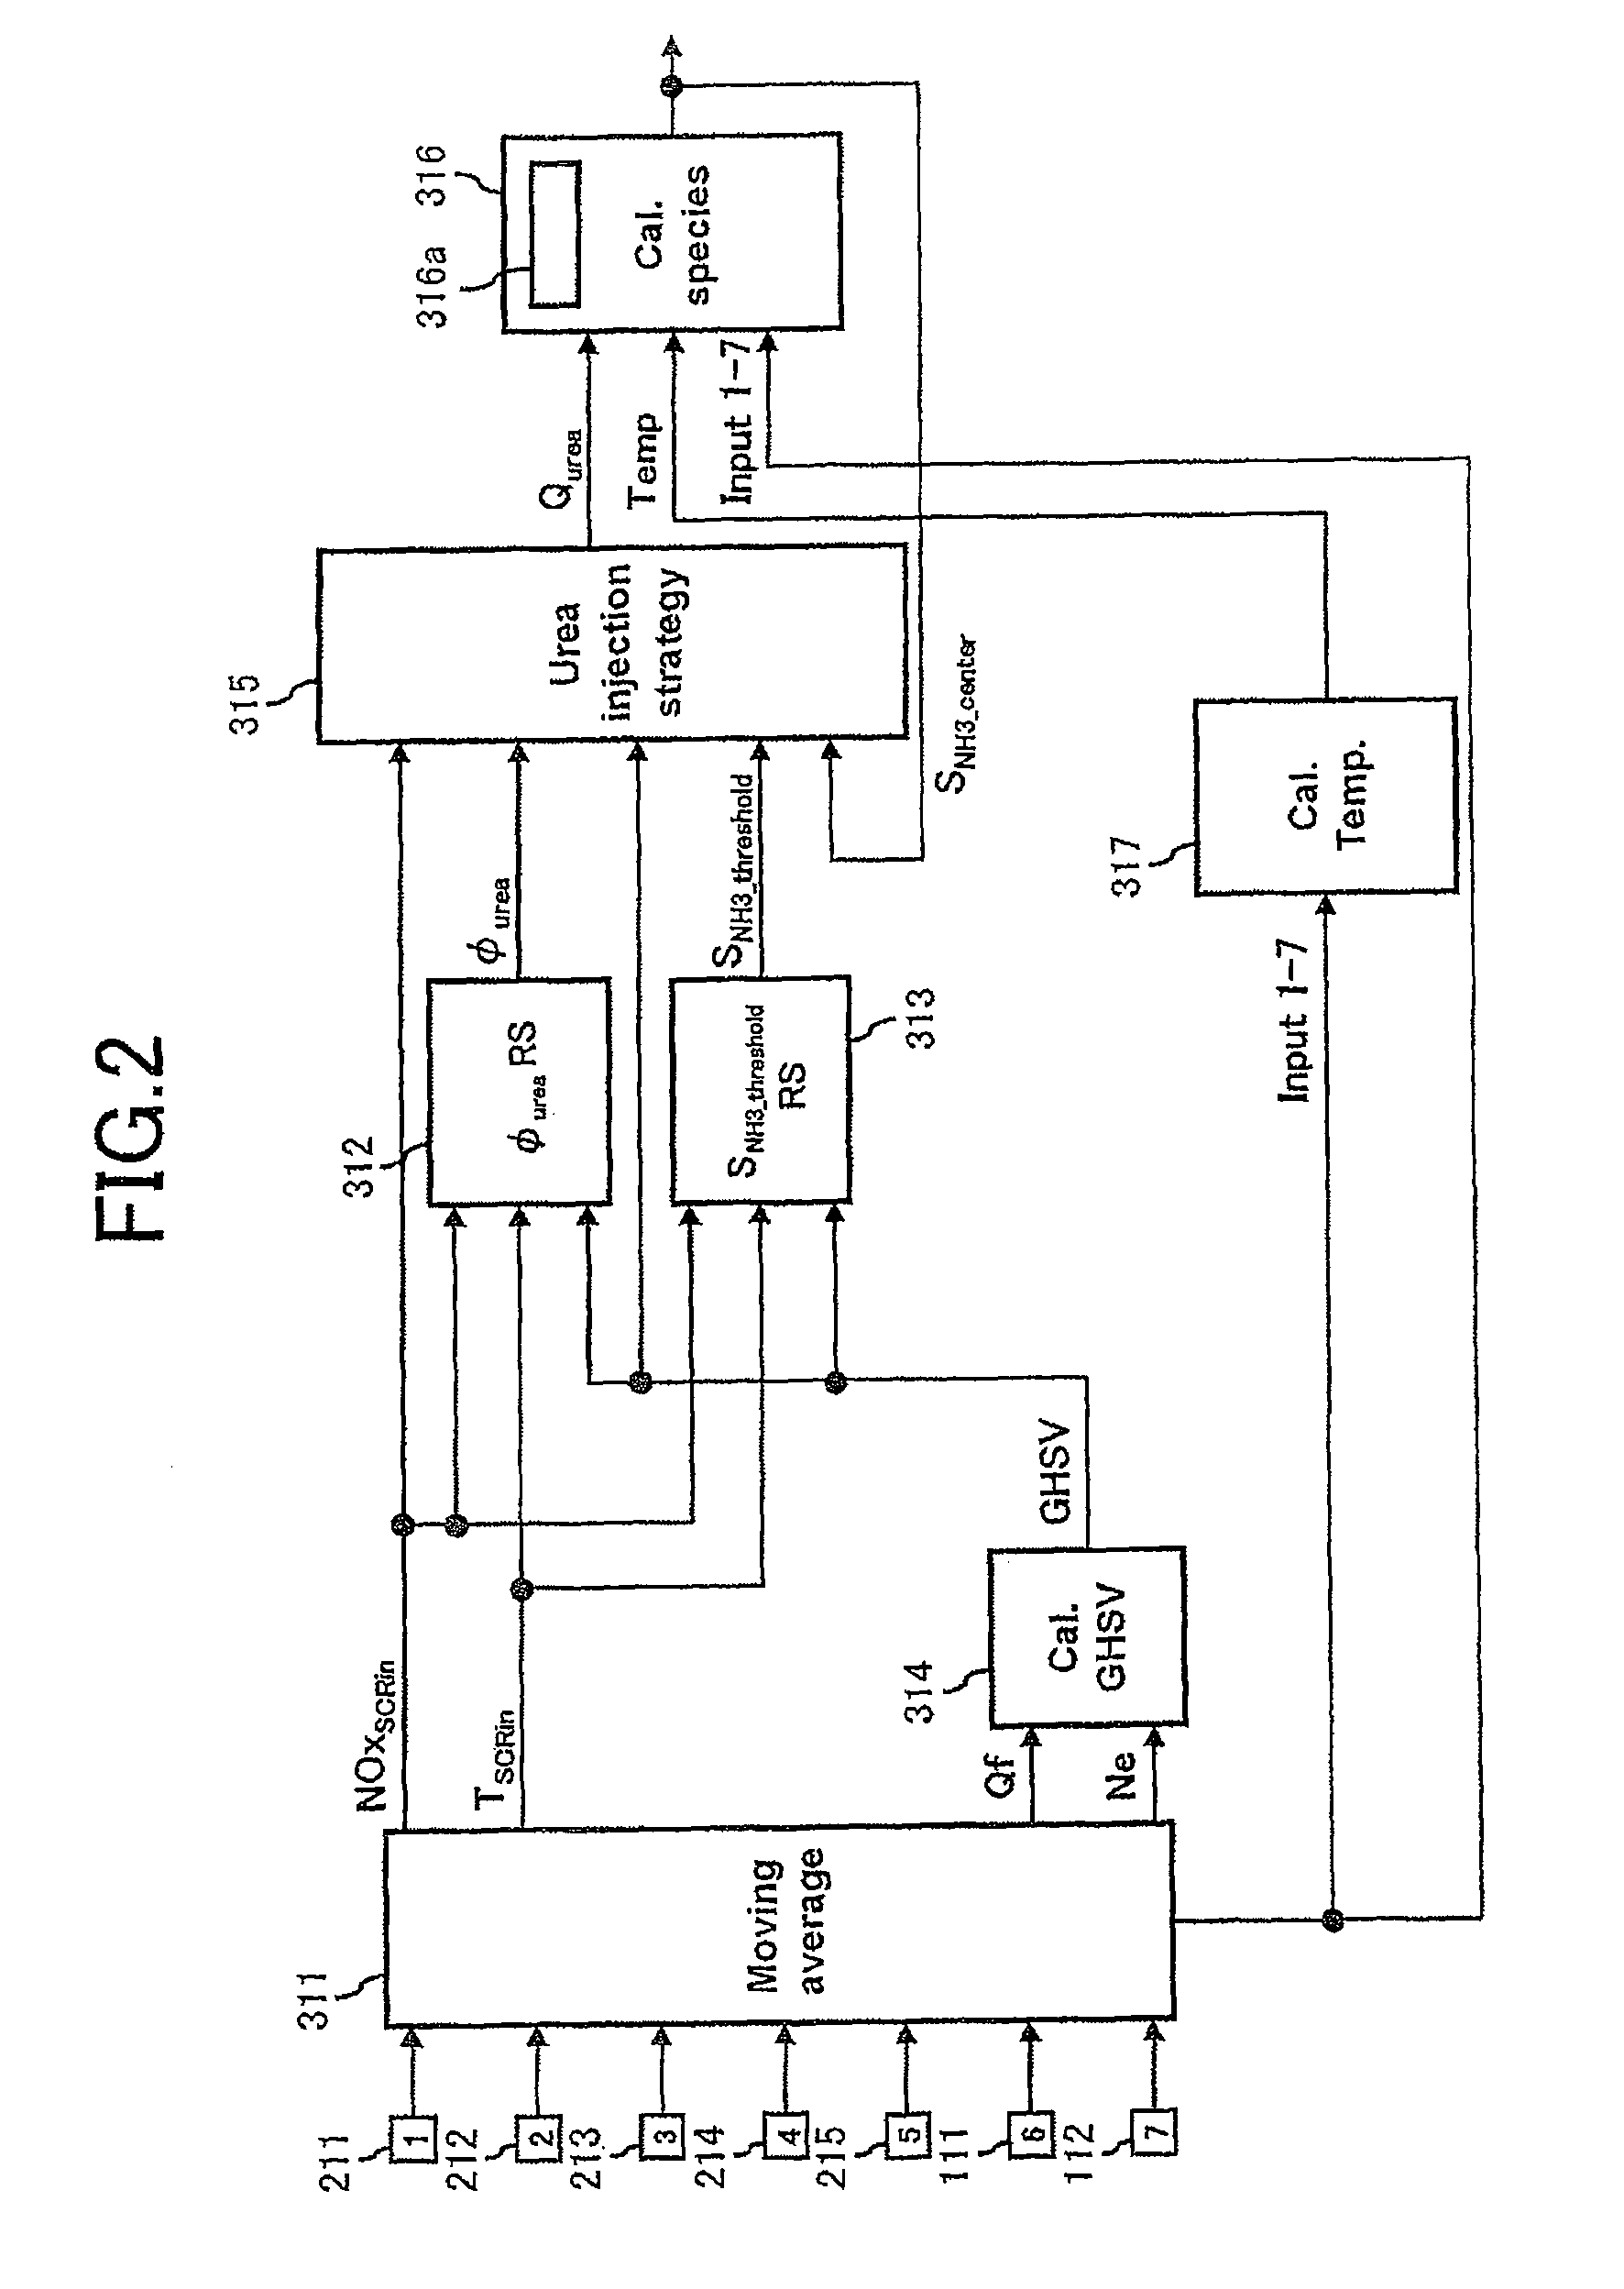 Engine exhaust purification device